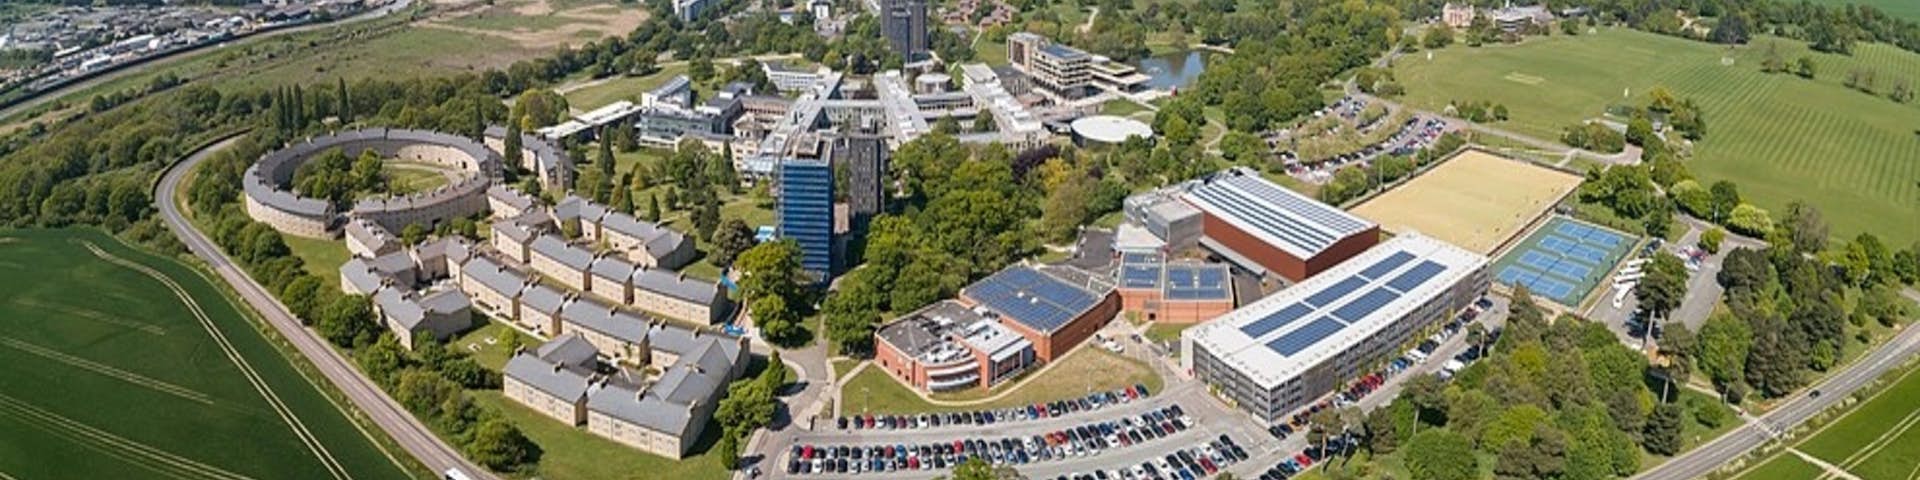 Finance and Management at University of Essex 